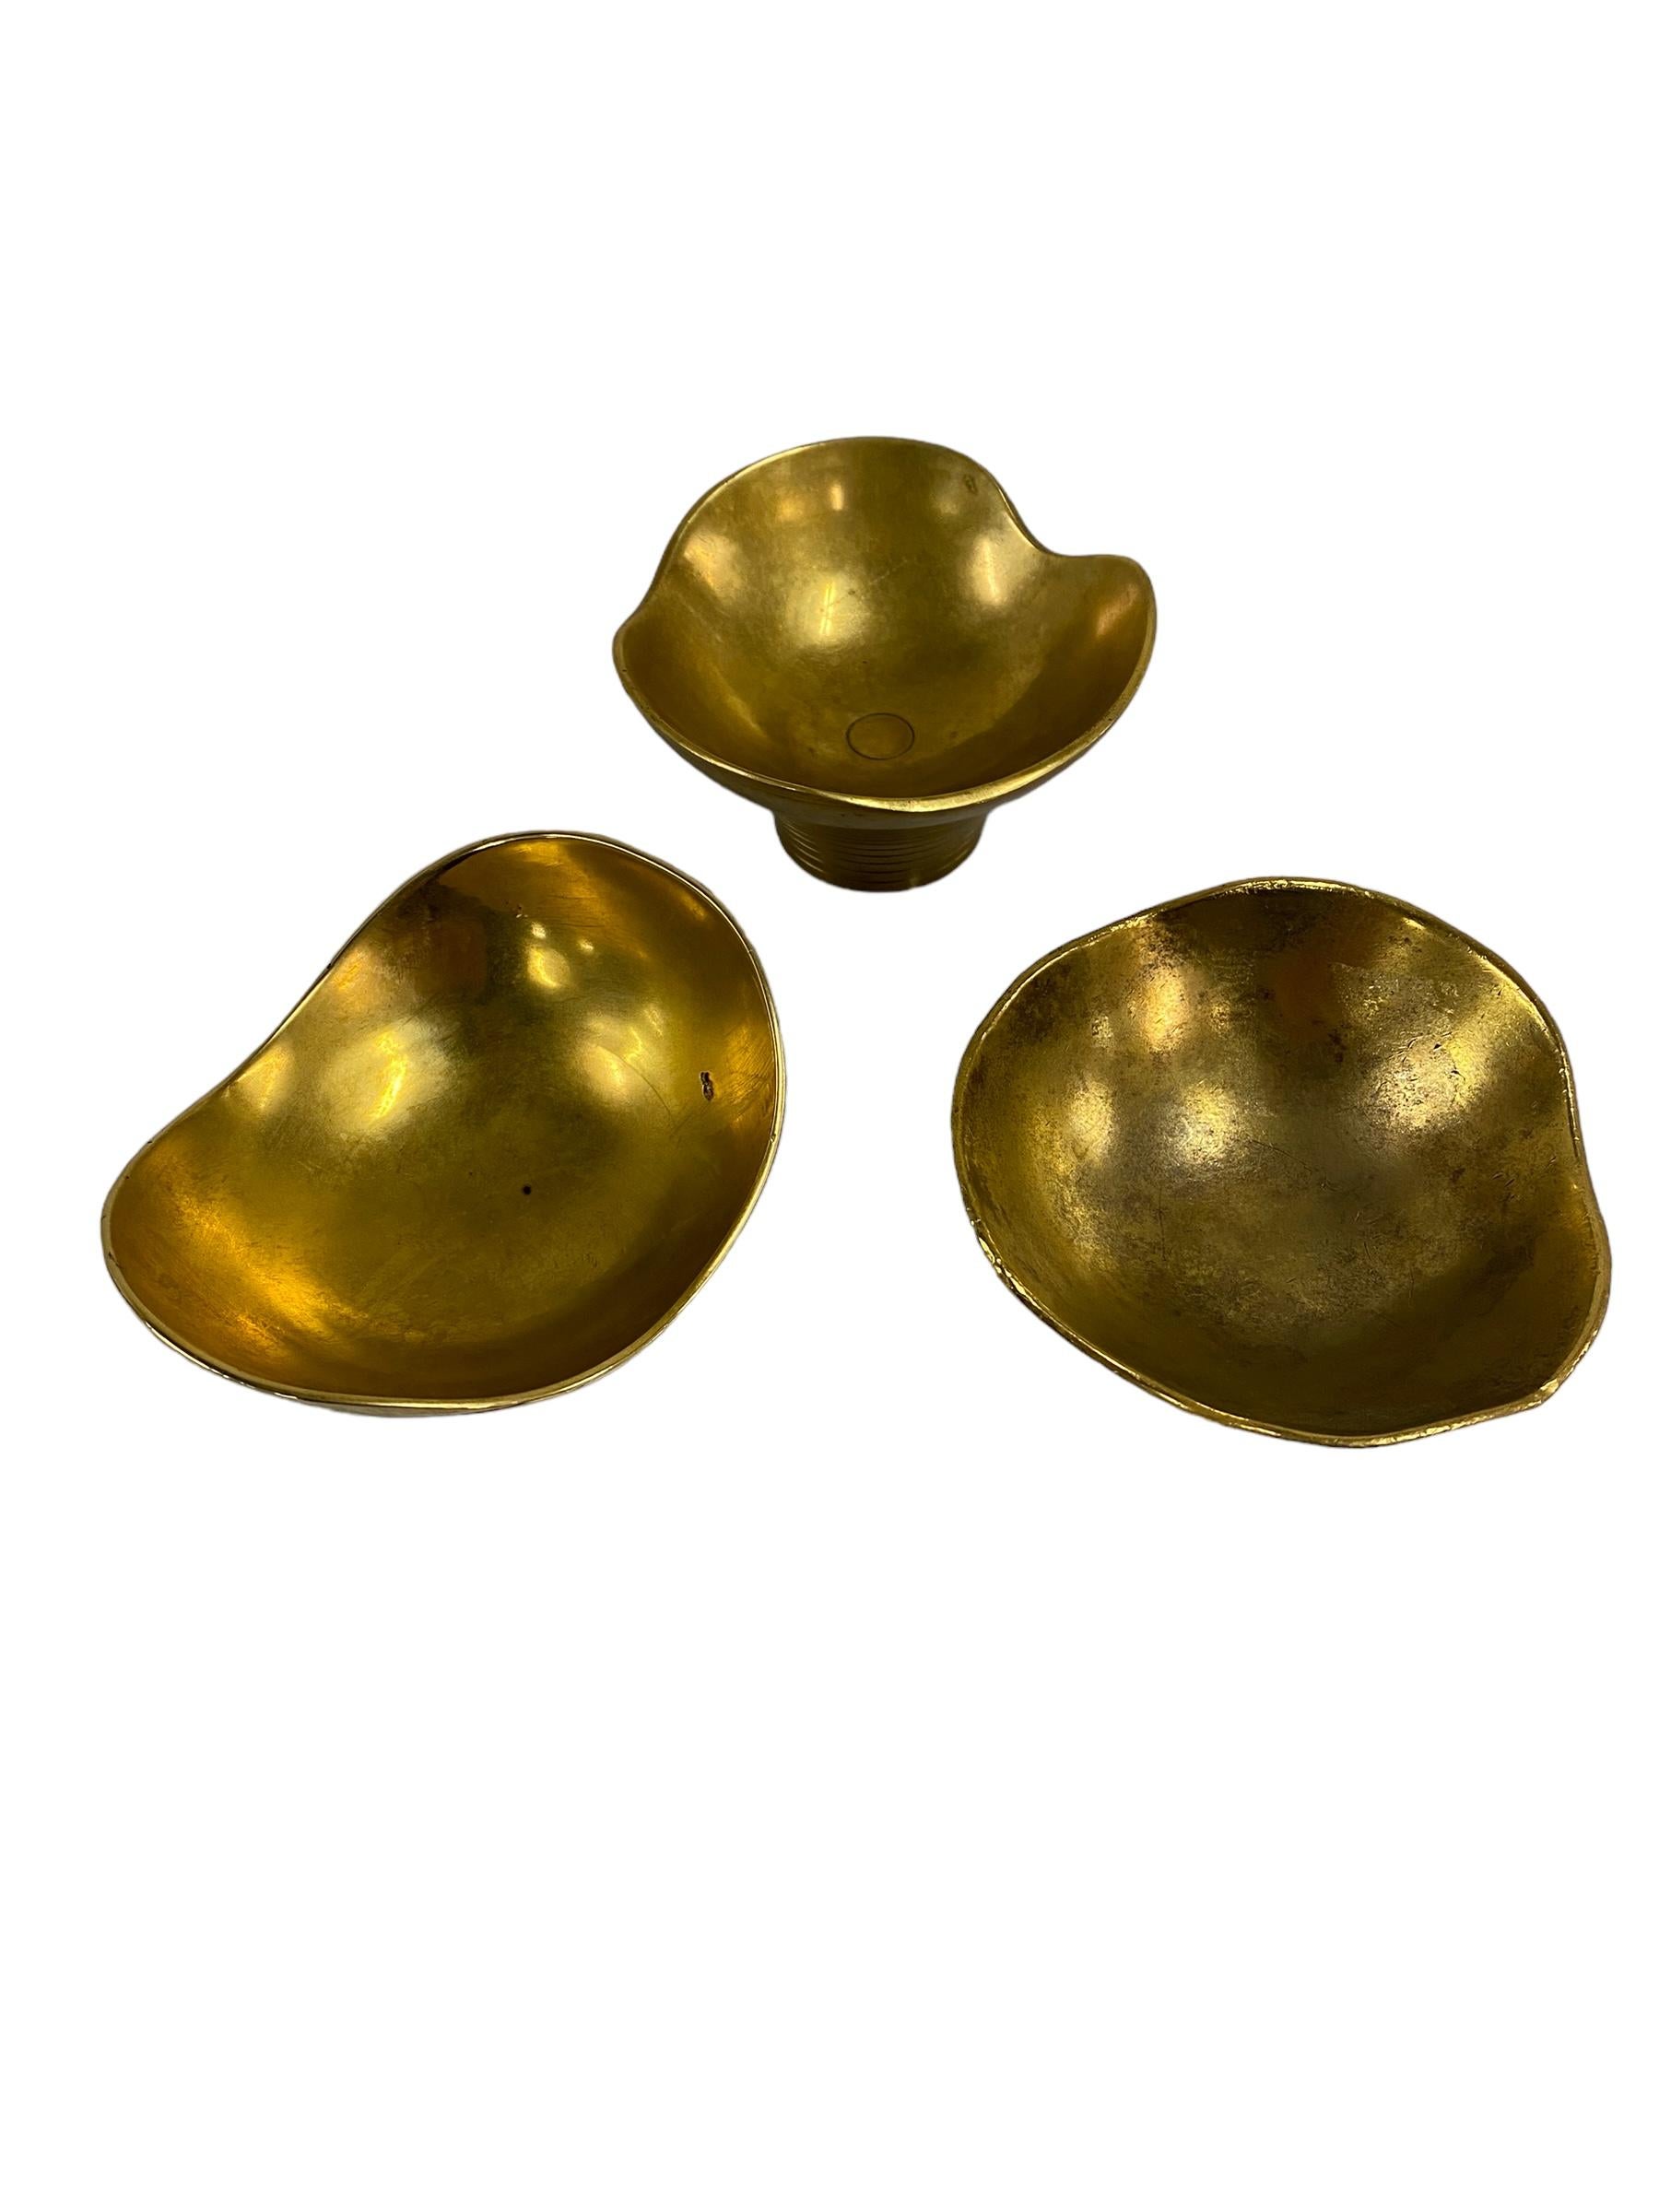 Scandinavian Modern A Set of 3 Paavo & Helena Tynell Brass Bowl no. 4, Taito 1940s For Sale